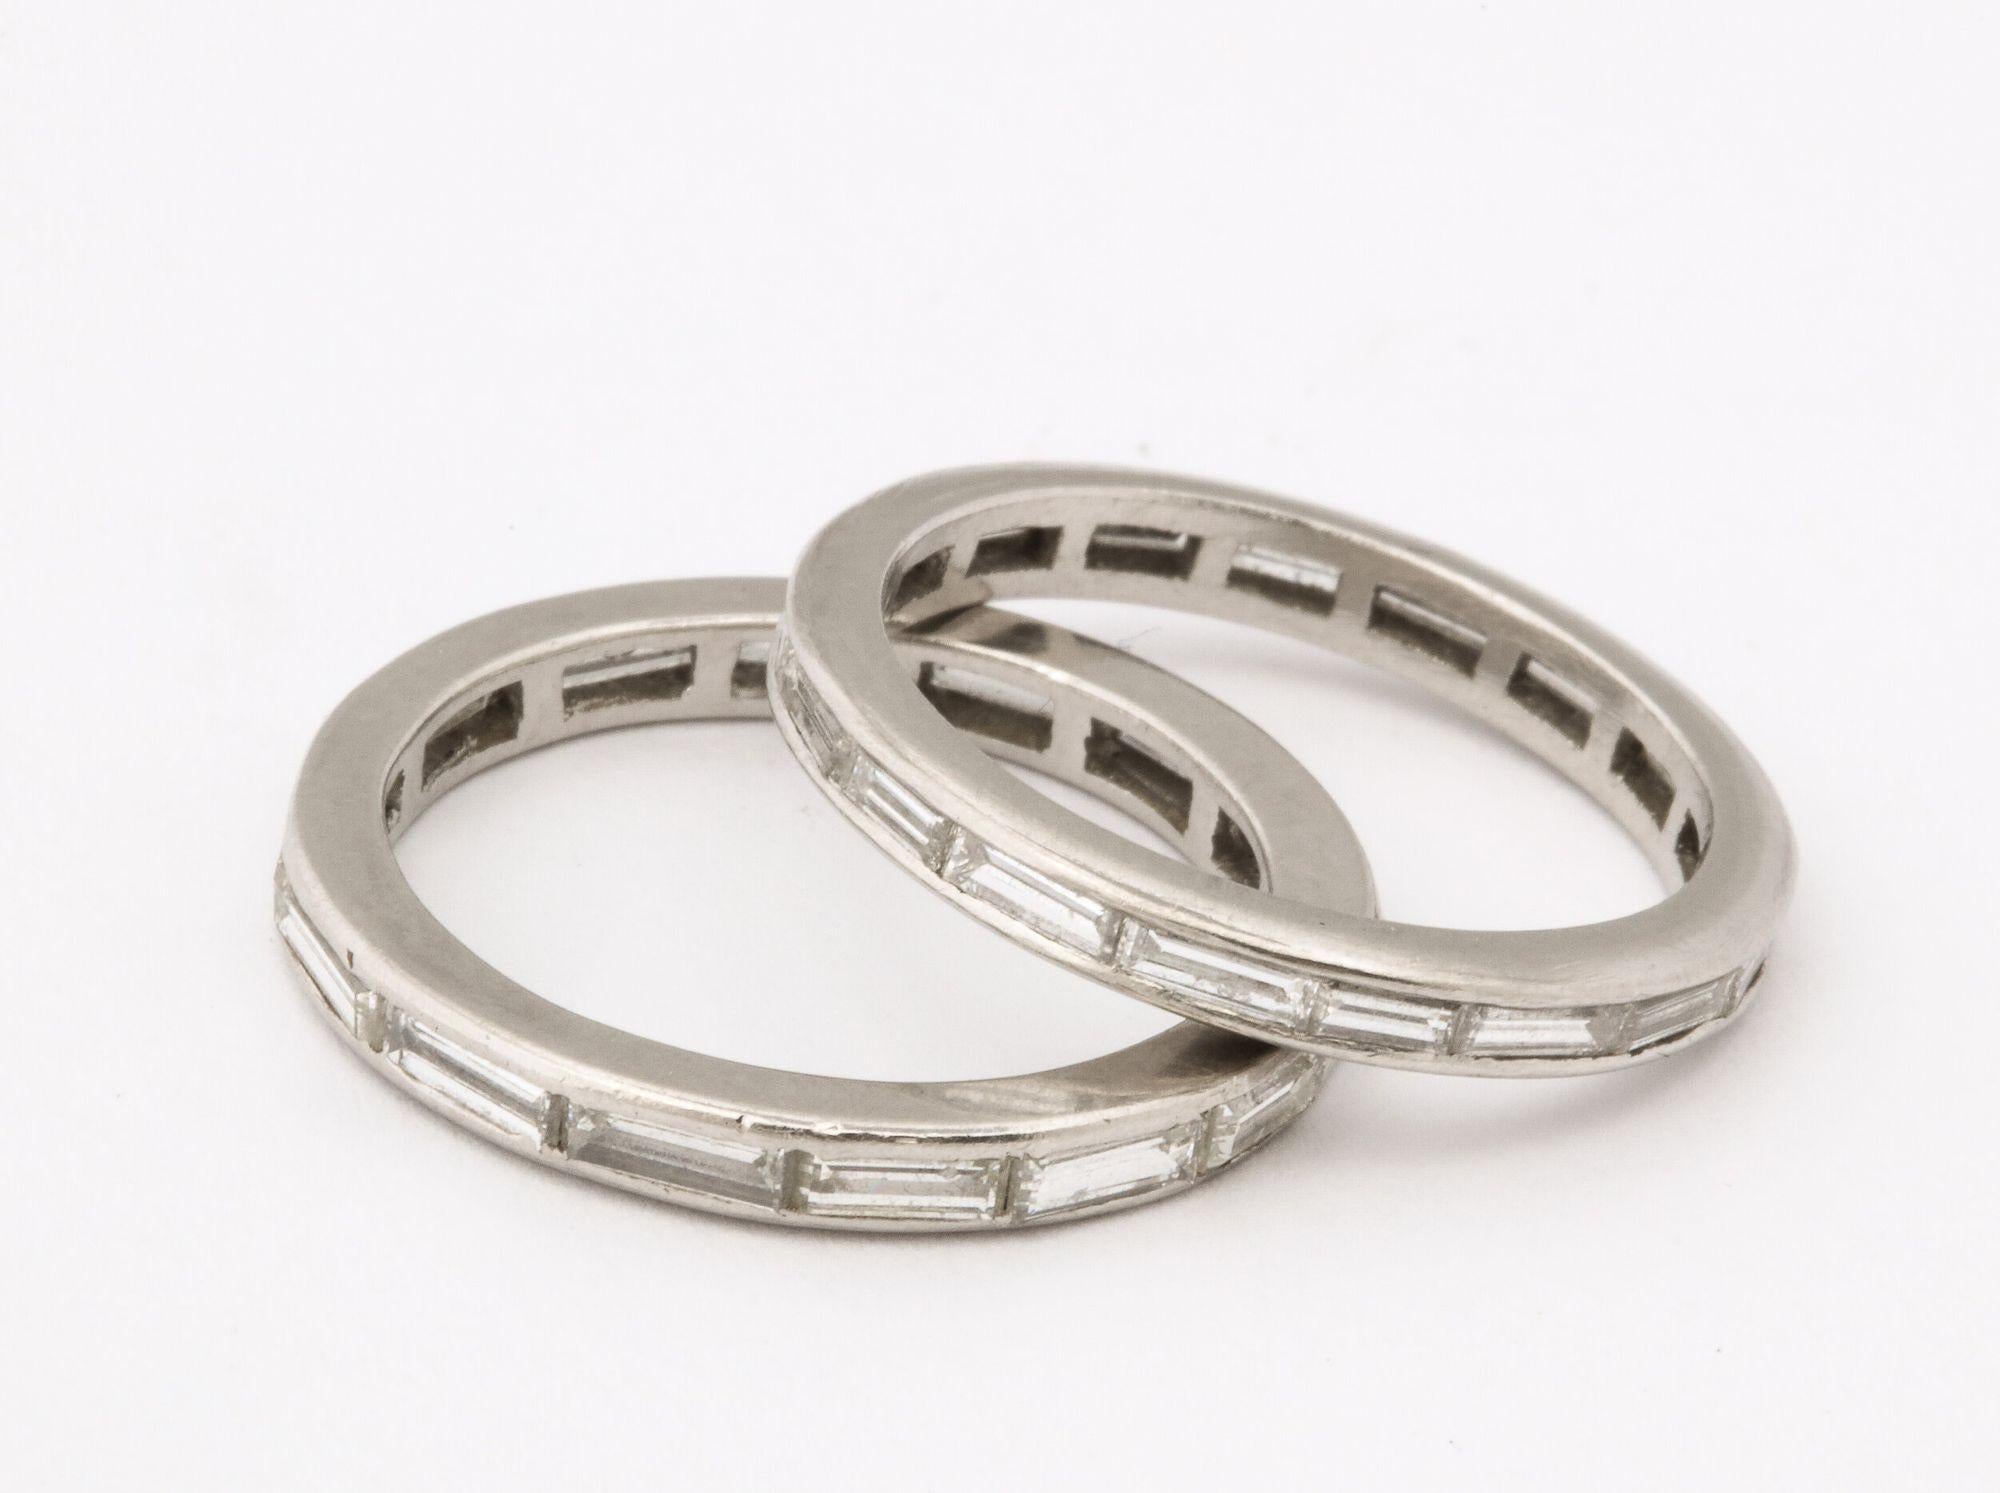 This beautiful baguette diamond eternity bands have fine quality diamonds They are size 6 and 61/2 and look great with other rings worn as stacking rings. Sold separately.